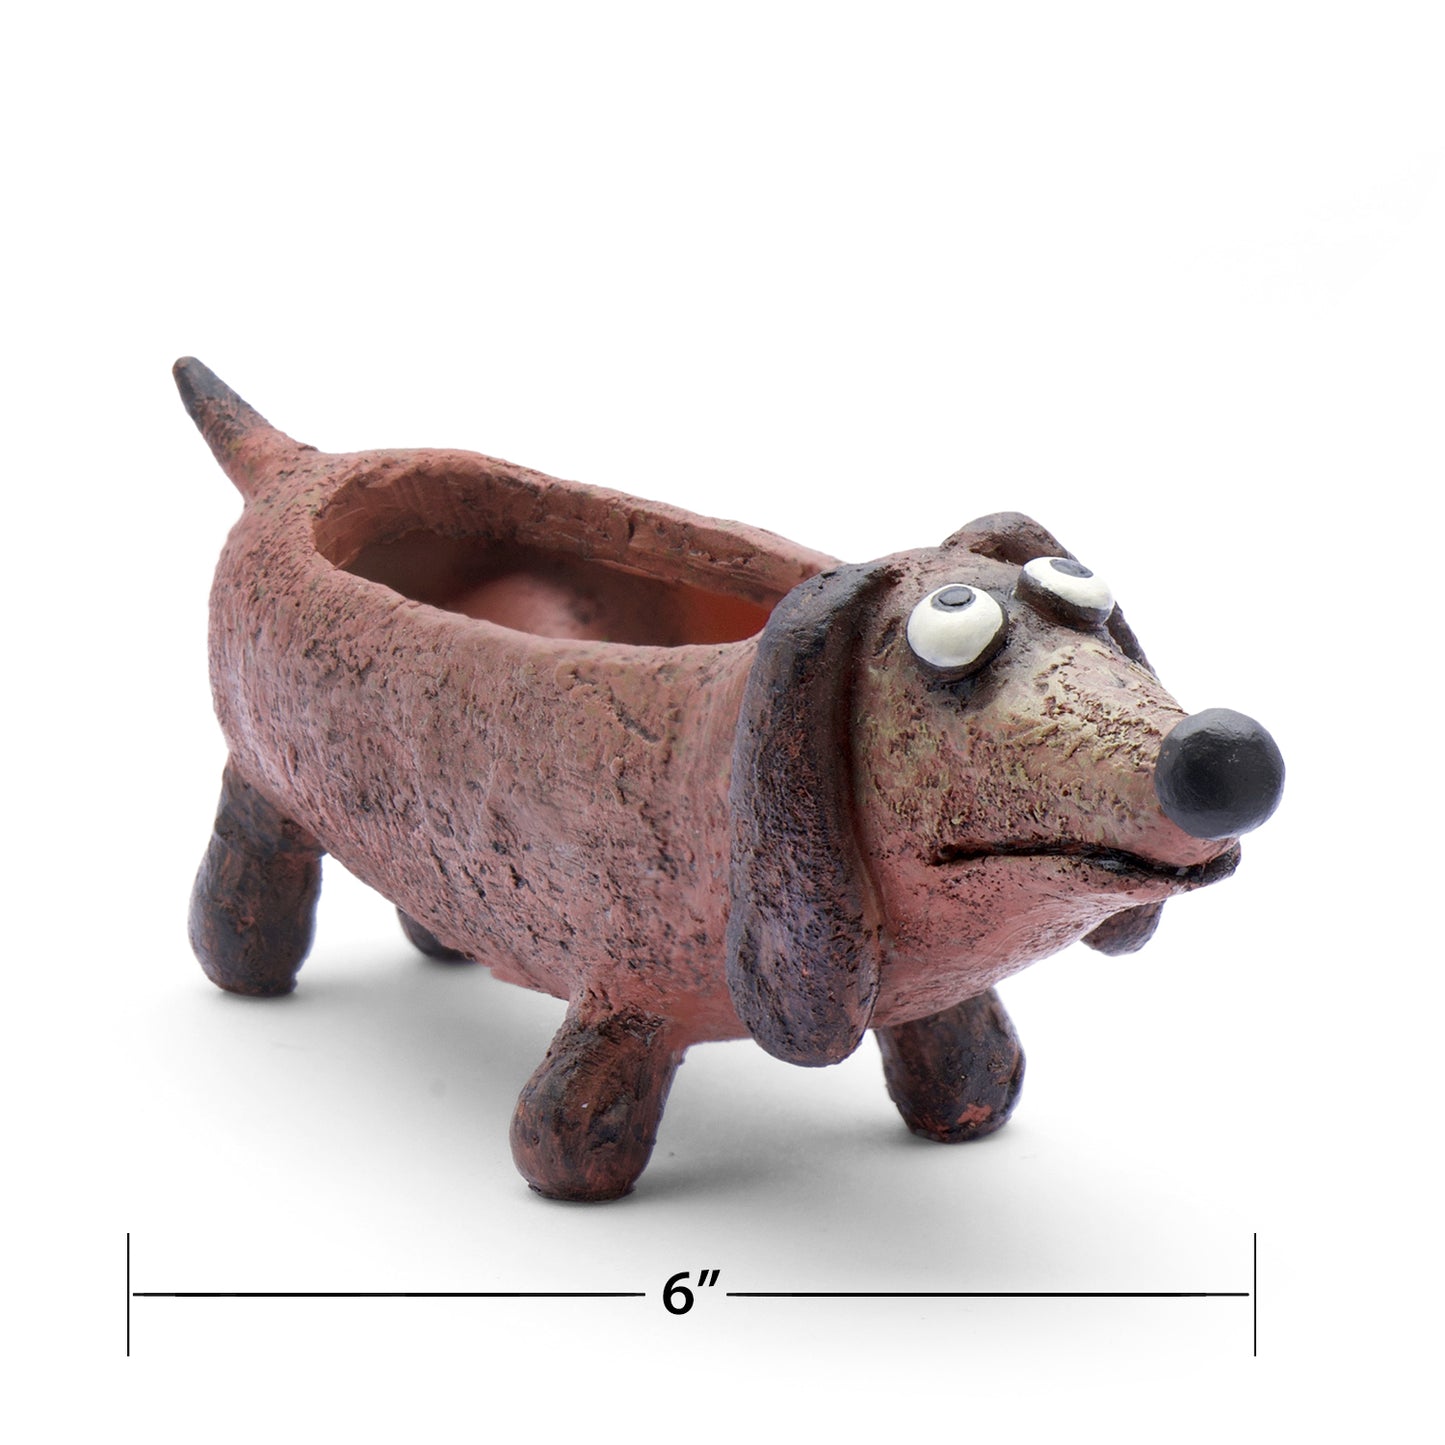 Baby Doxie the Dog Planter